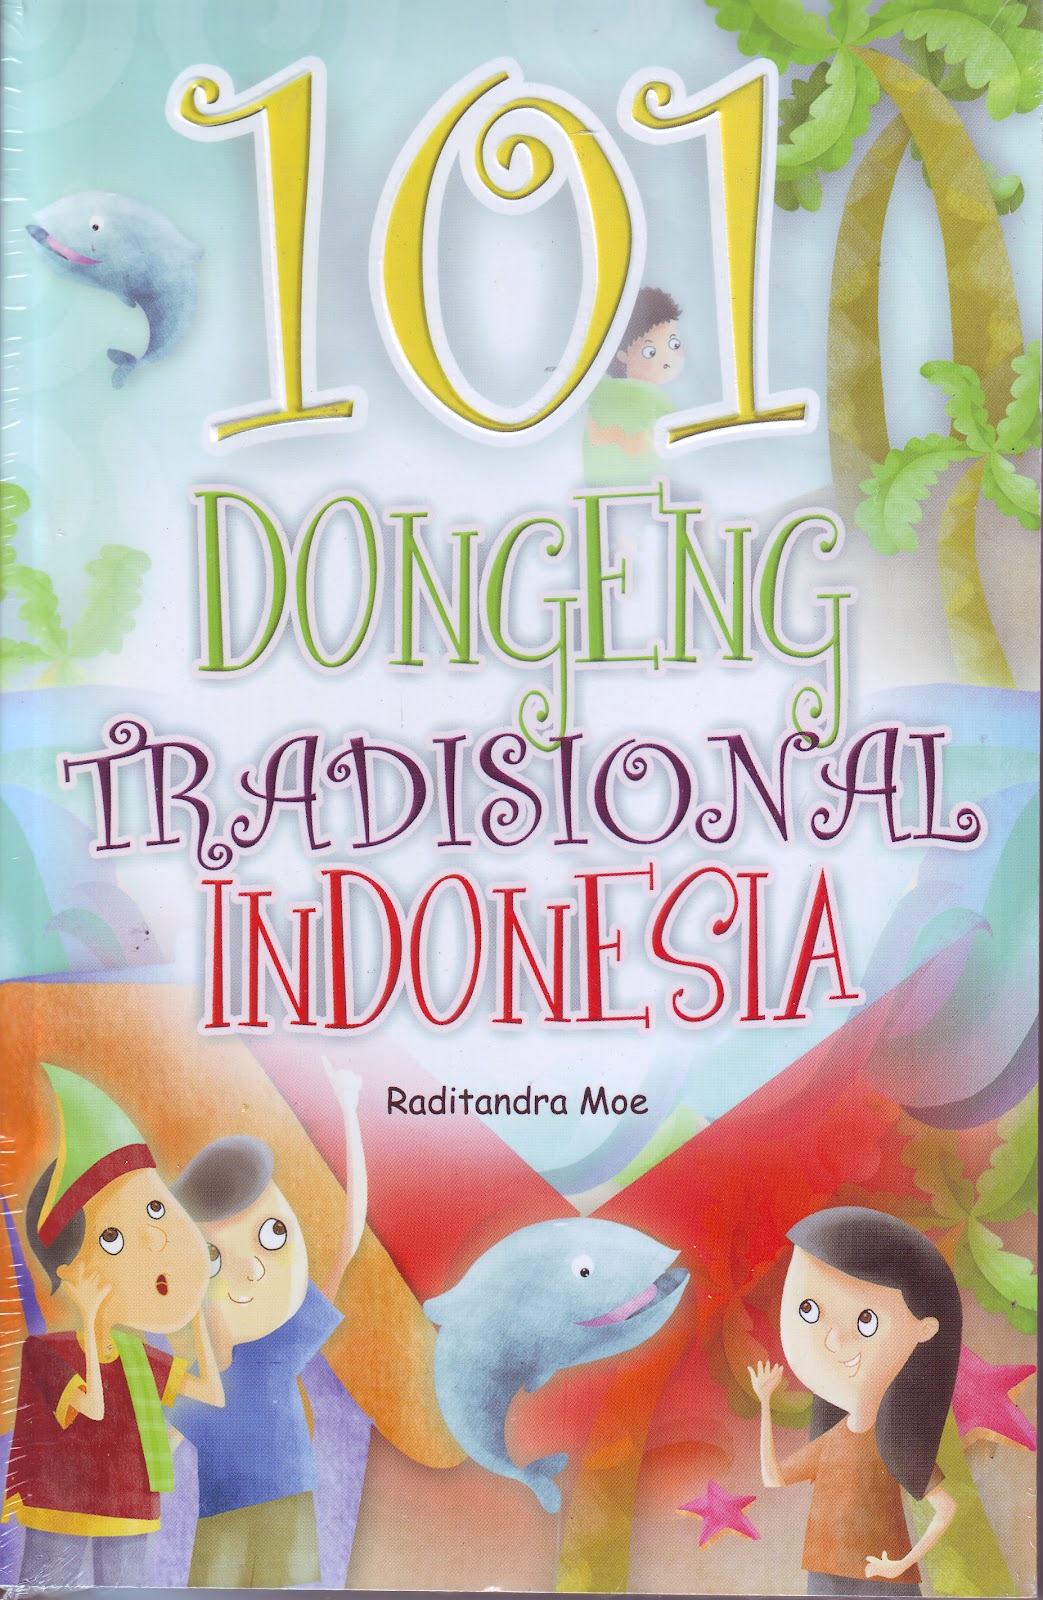 15 101 Dongeng Tradisional Indonesia INDscript Creative